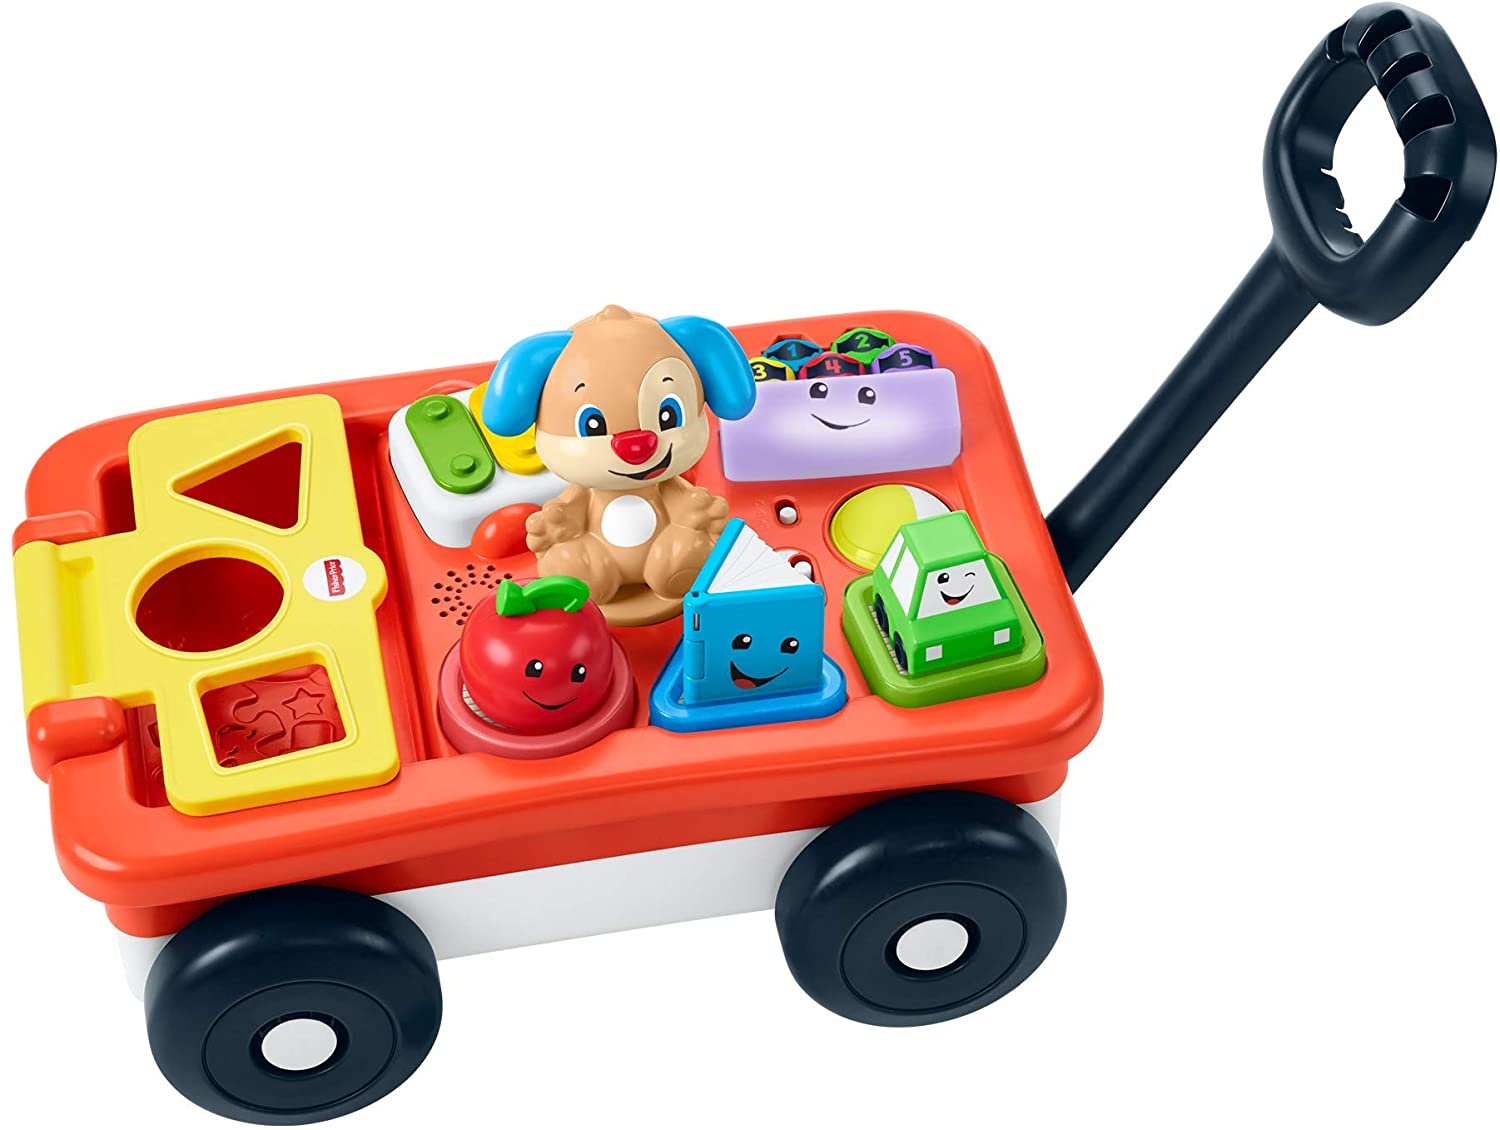 7 Best Fisher-Price Laugh & Learn Reviews of 2022 6